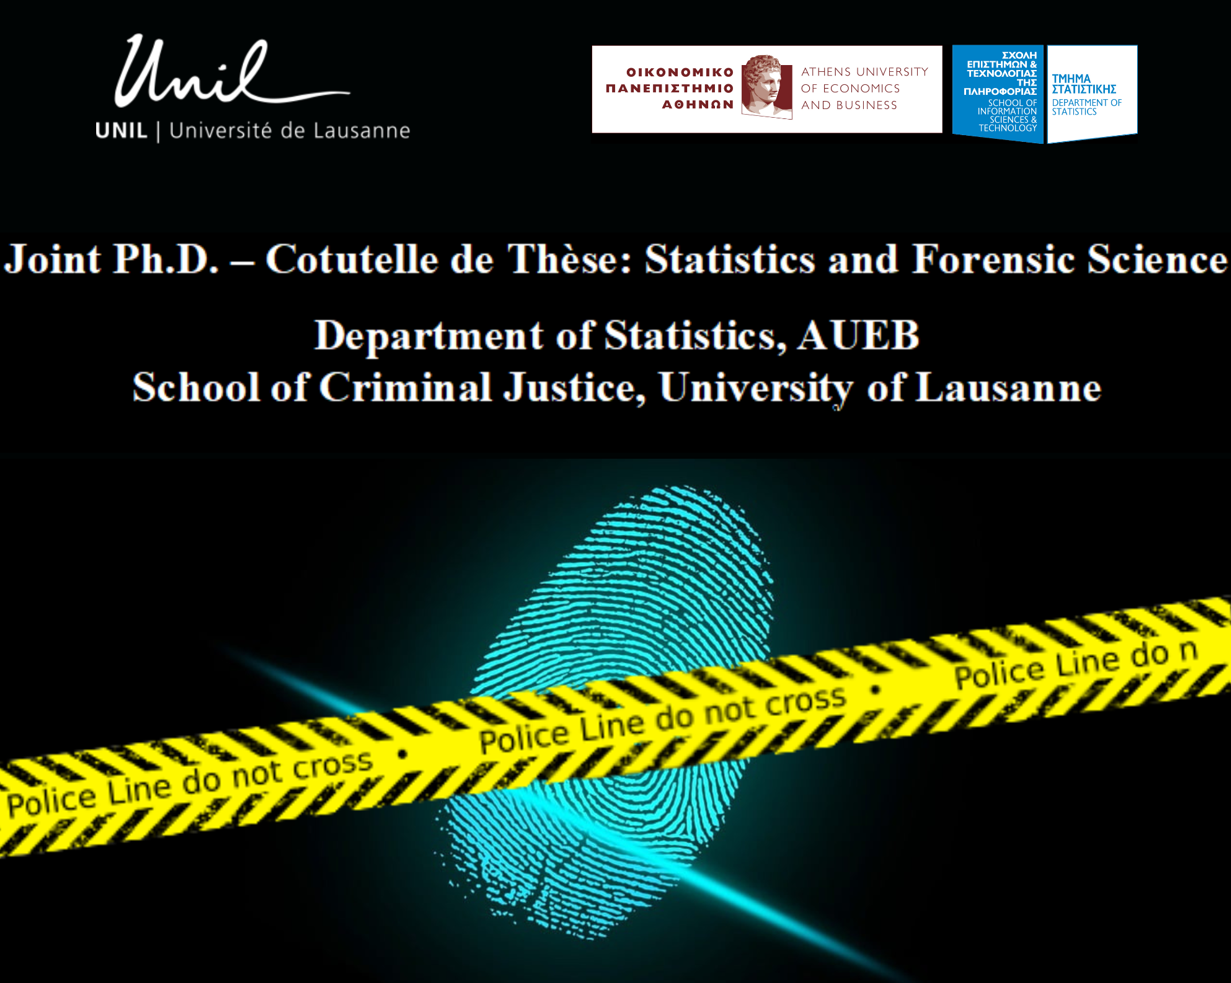 Joint Ph.D. (Cotutelle de Thèse) between the University of Lausanne and the Athens University of Economics and Business: “Statistics and Forensic Science” Department of Statistics, AUEB School of Criminal Justice, University of Lausanne